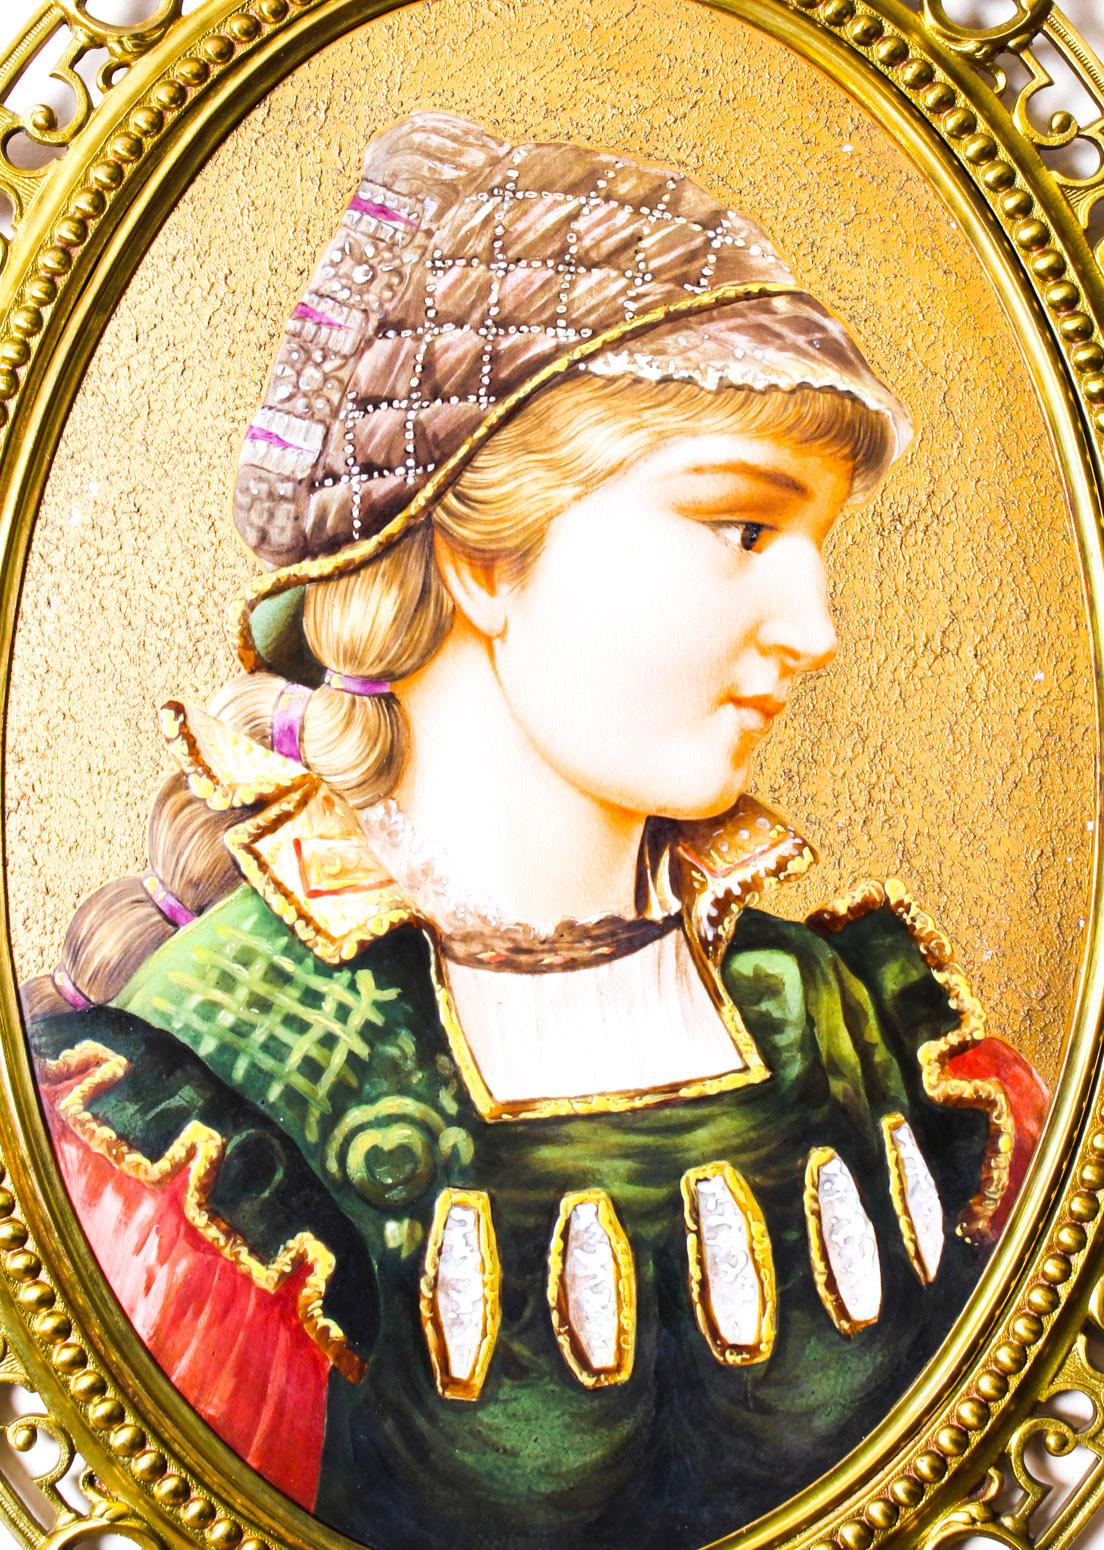 This is a stunning and unique antique Berlin framed porcelain plaque, circa 1870 in date.

This magnificent plaque is oval in shape with an exquisite gilded cast and pierced ormolu frame which borders a spectacular central hand painted portrait of